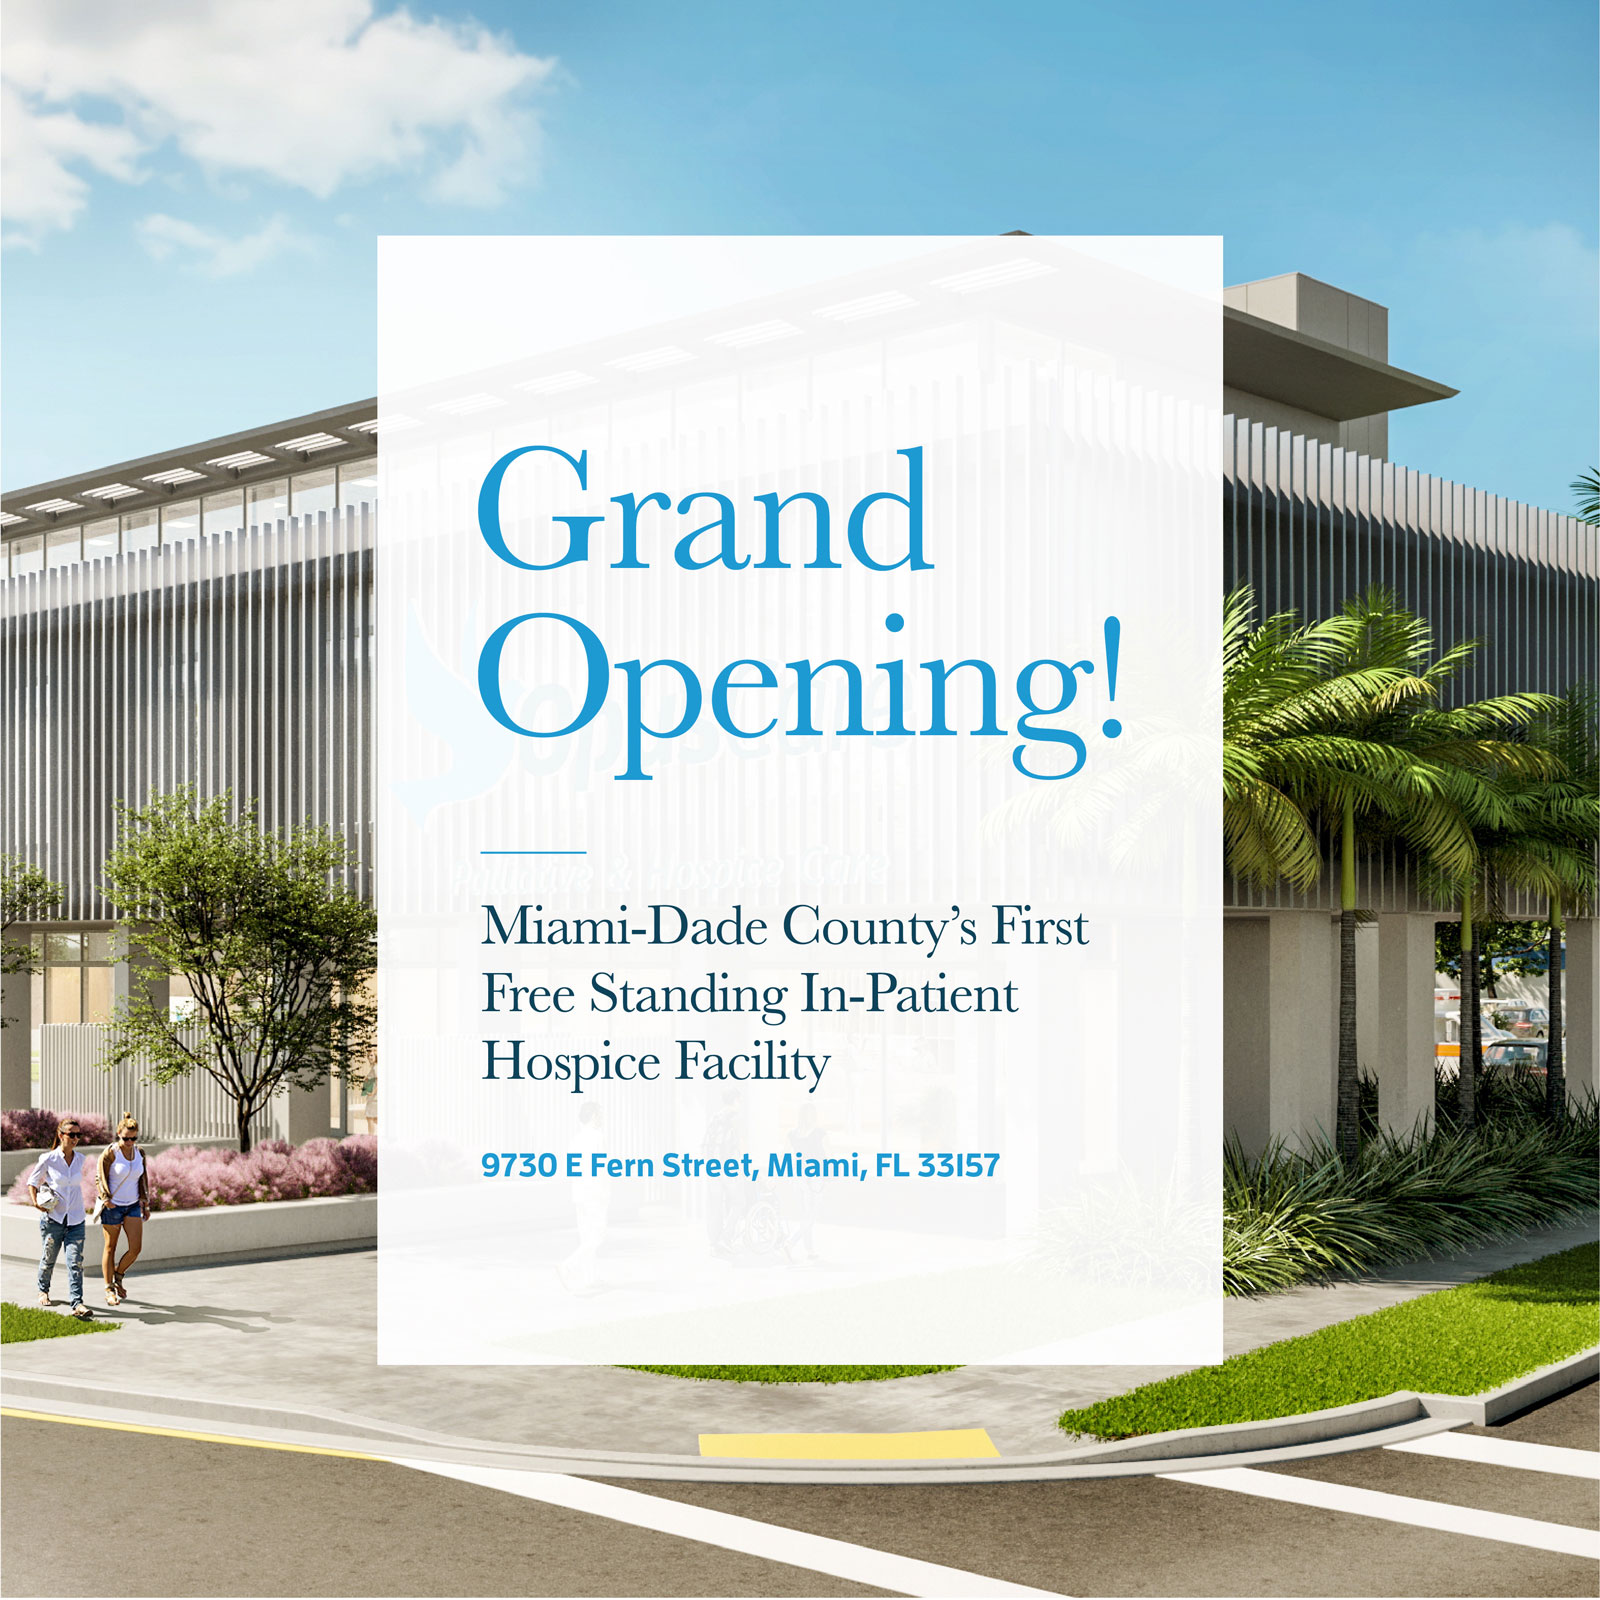 Grand Opening, Miami-Dade County's First
Free Standing In-Patientospice Facility, 9730 E Fern Street, Miami, FL 33157